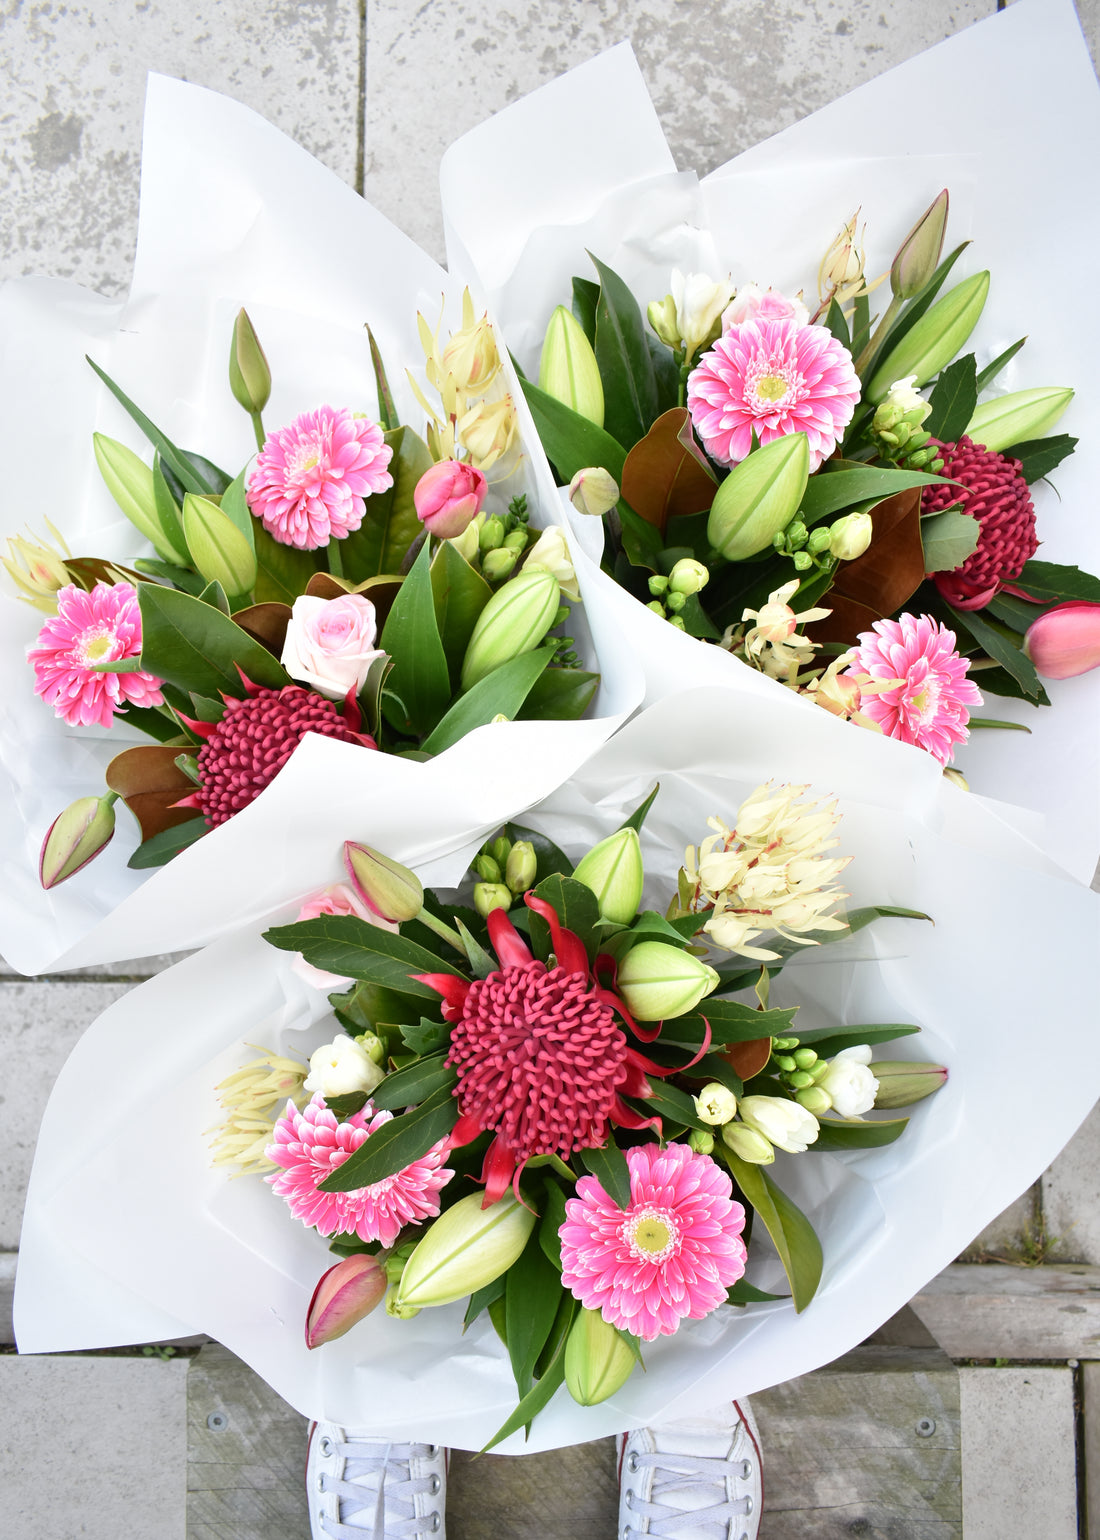 three fresh flower bouquets in whte paper wrap. Tulips, lilies and freesias in white and pink